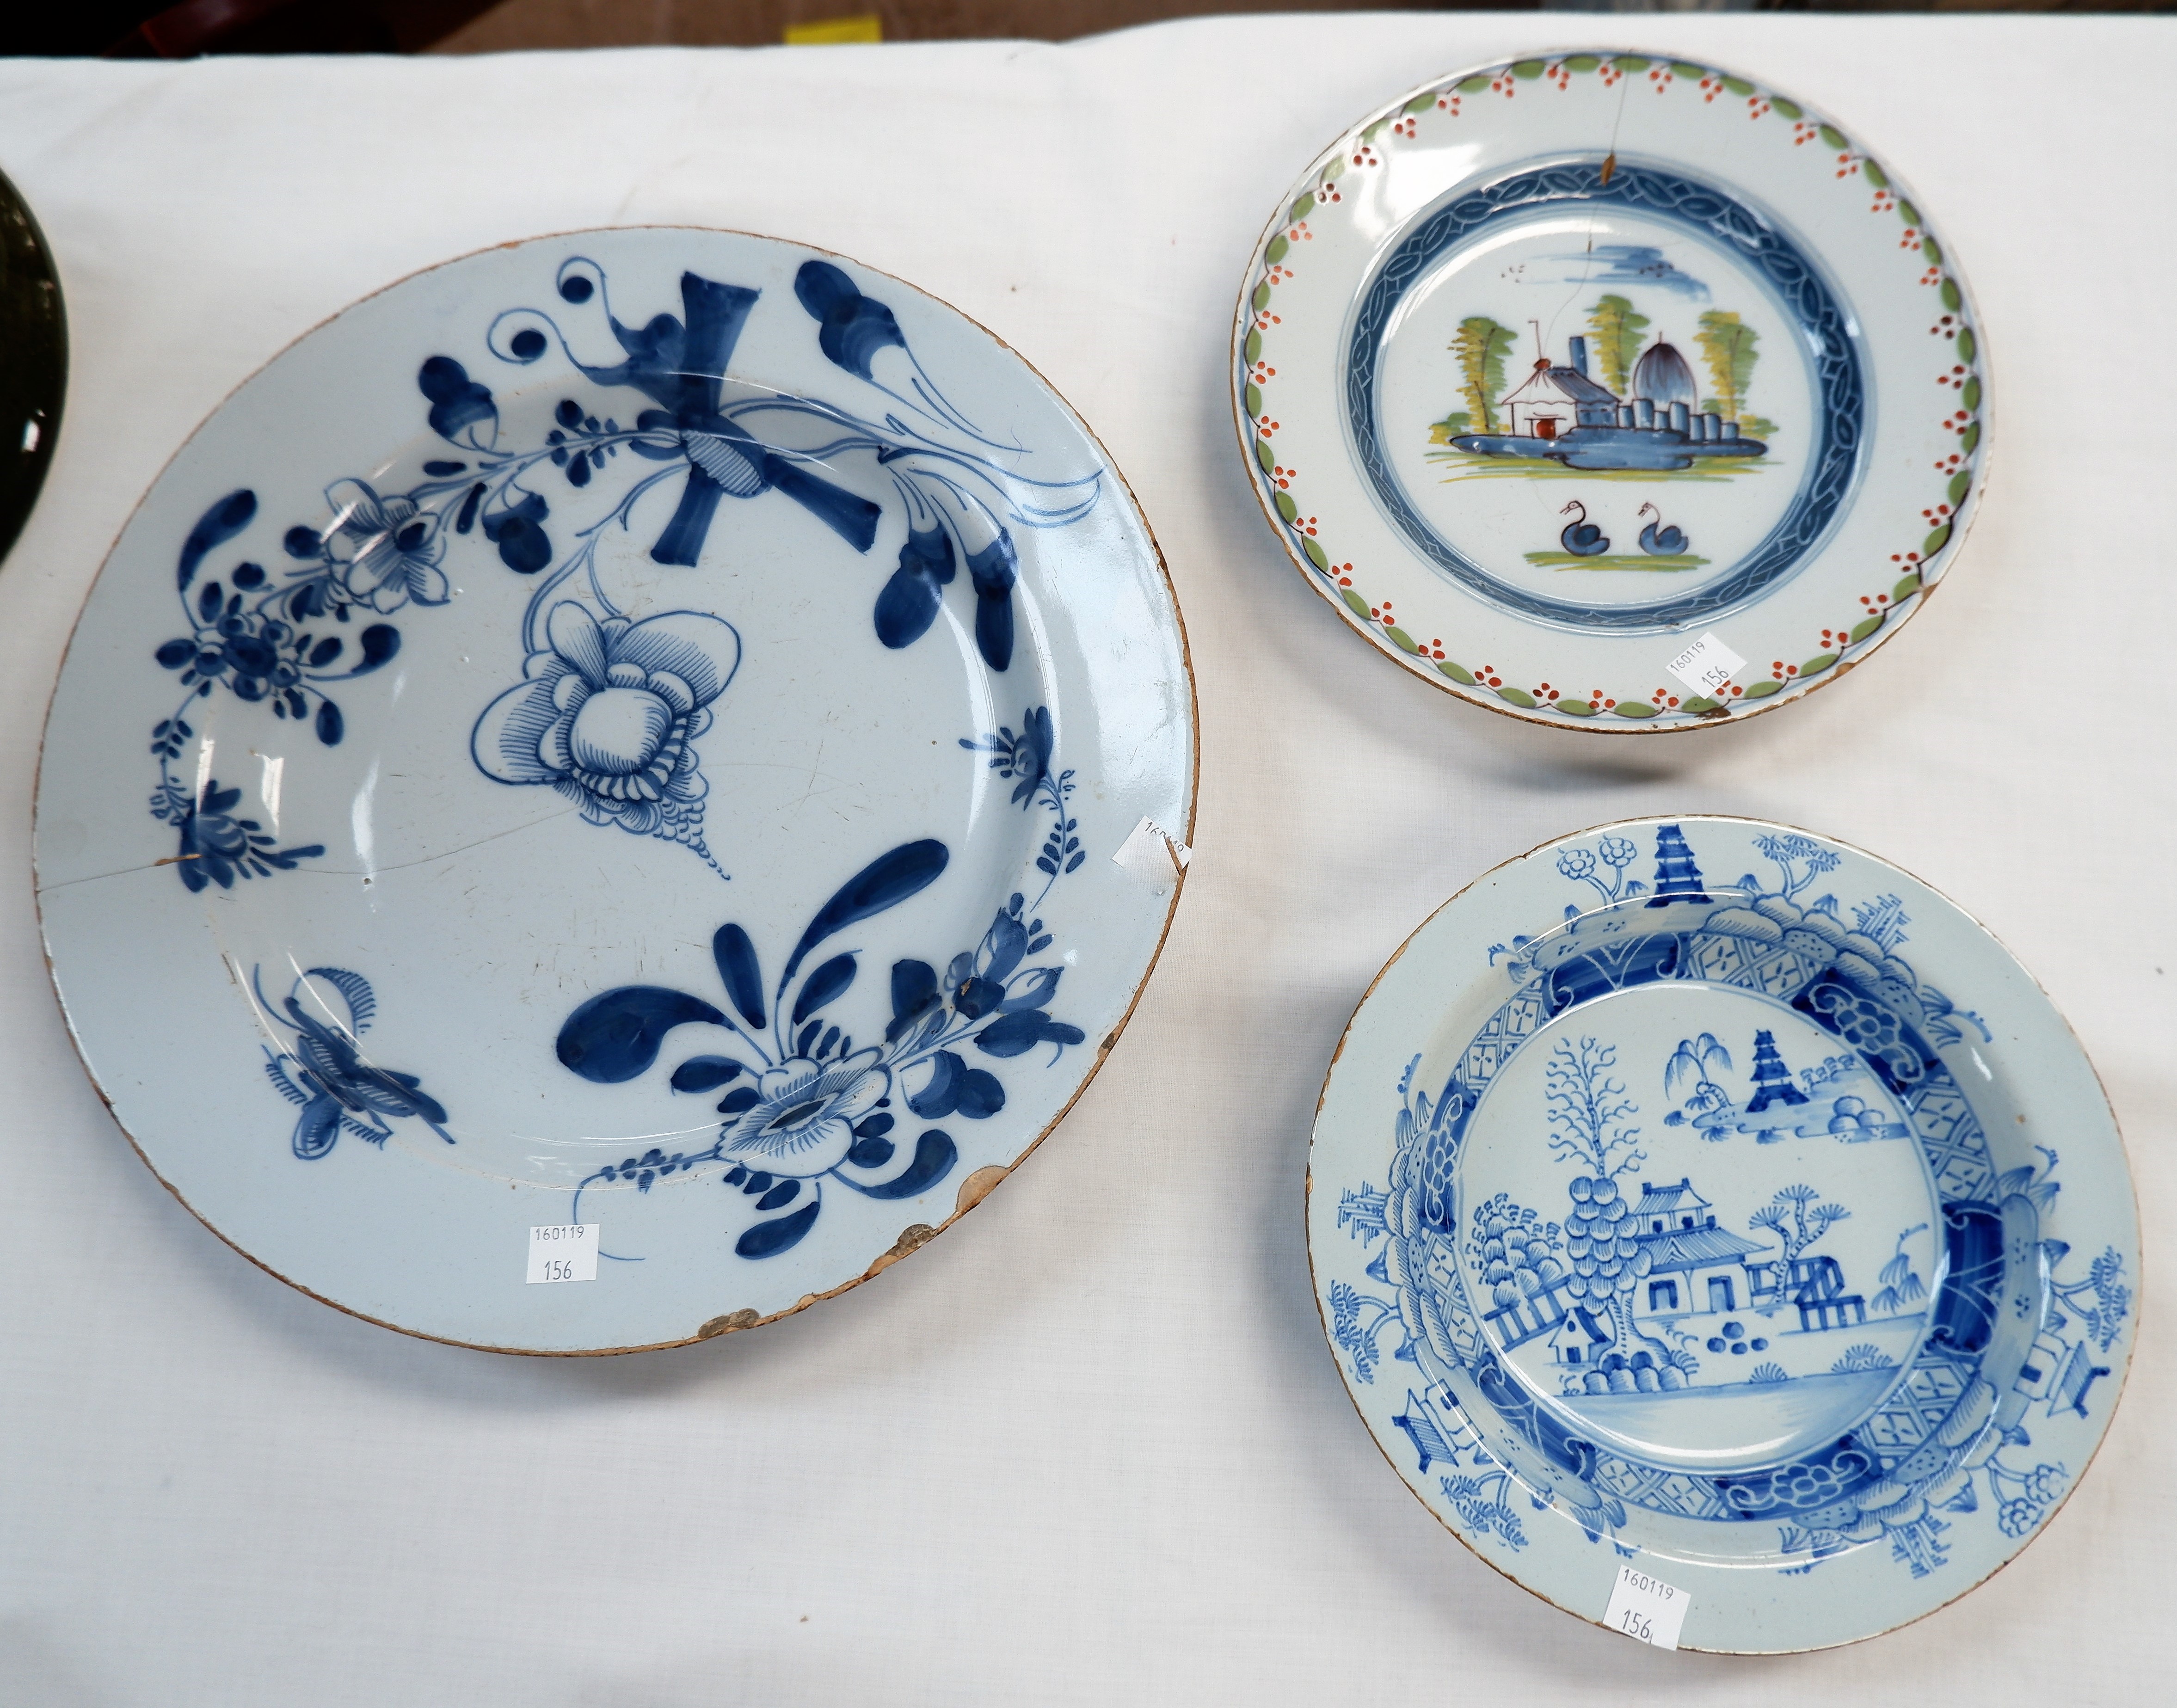 An 18th century Delft large blue & white circular dish (cracked and border fritted); a similar